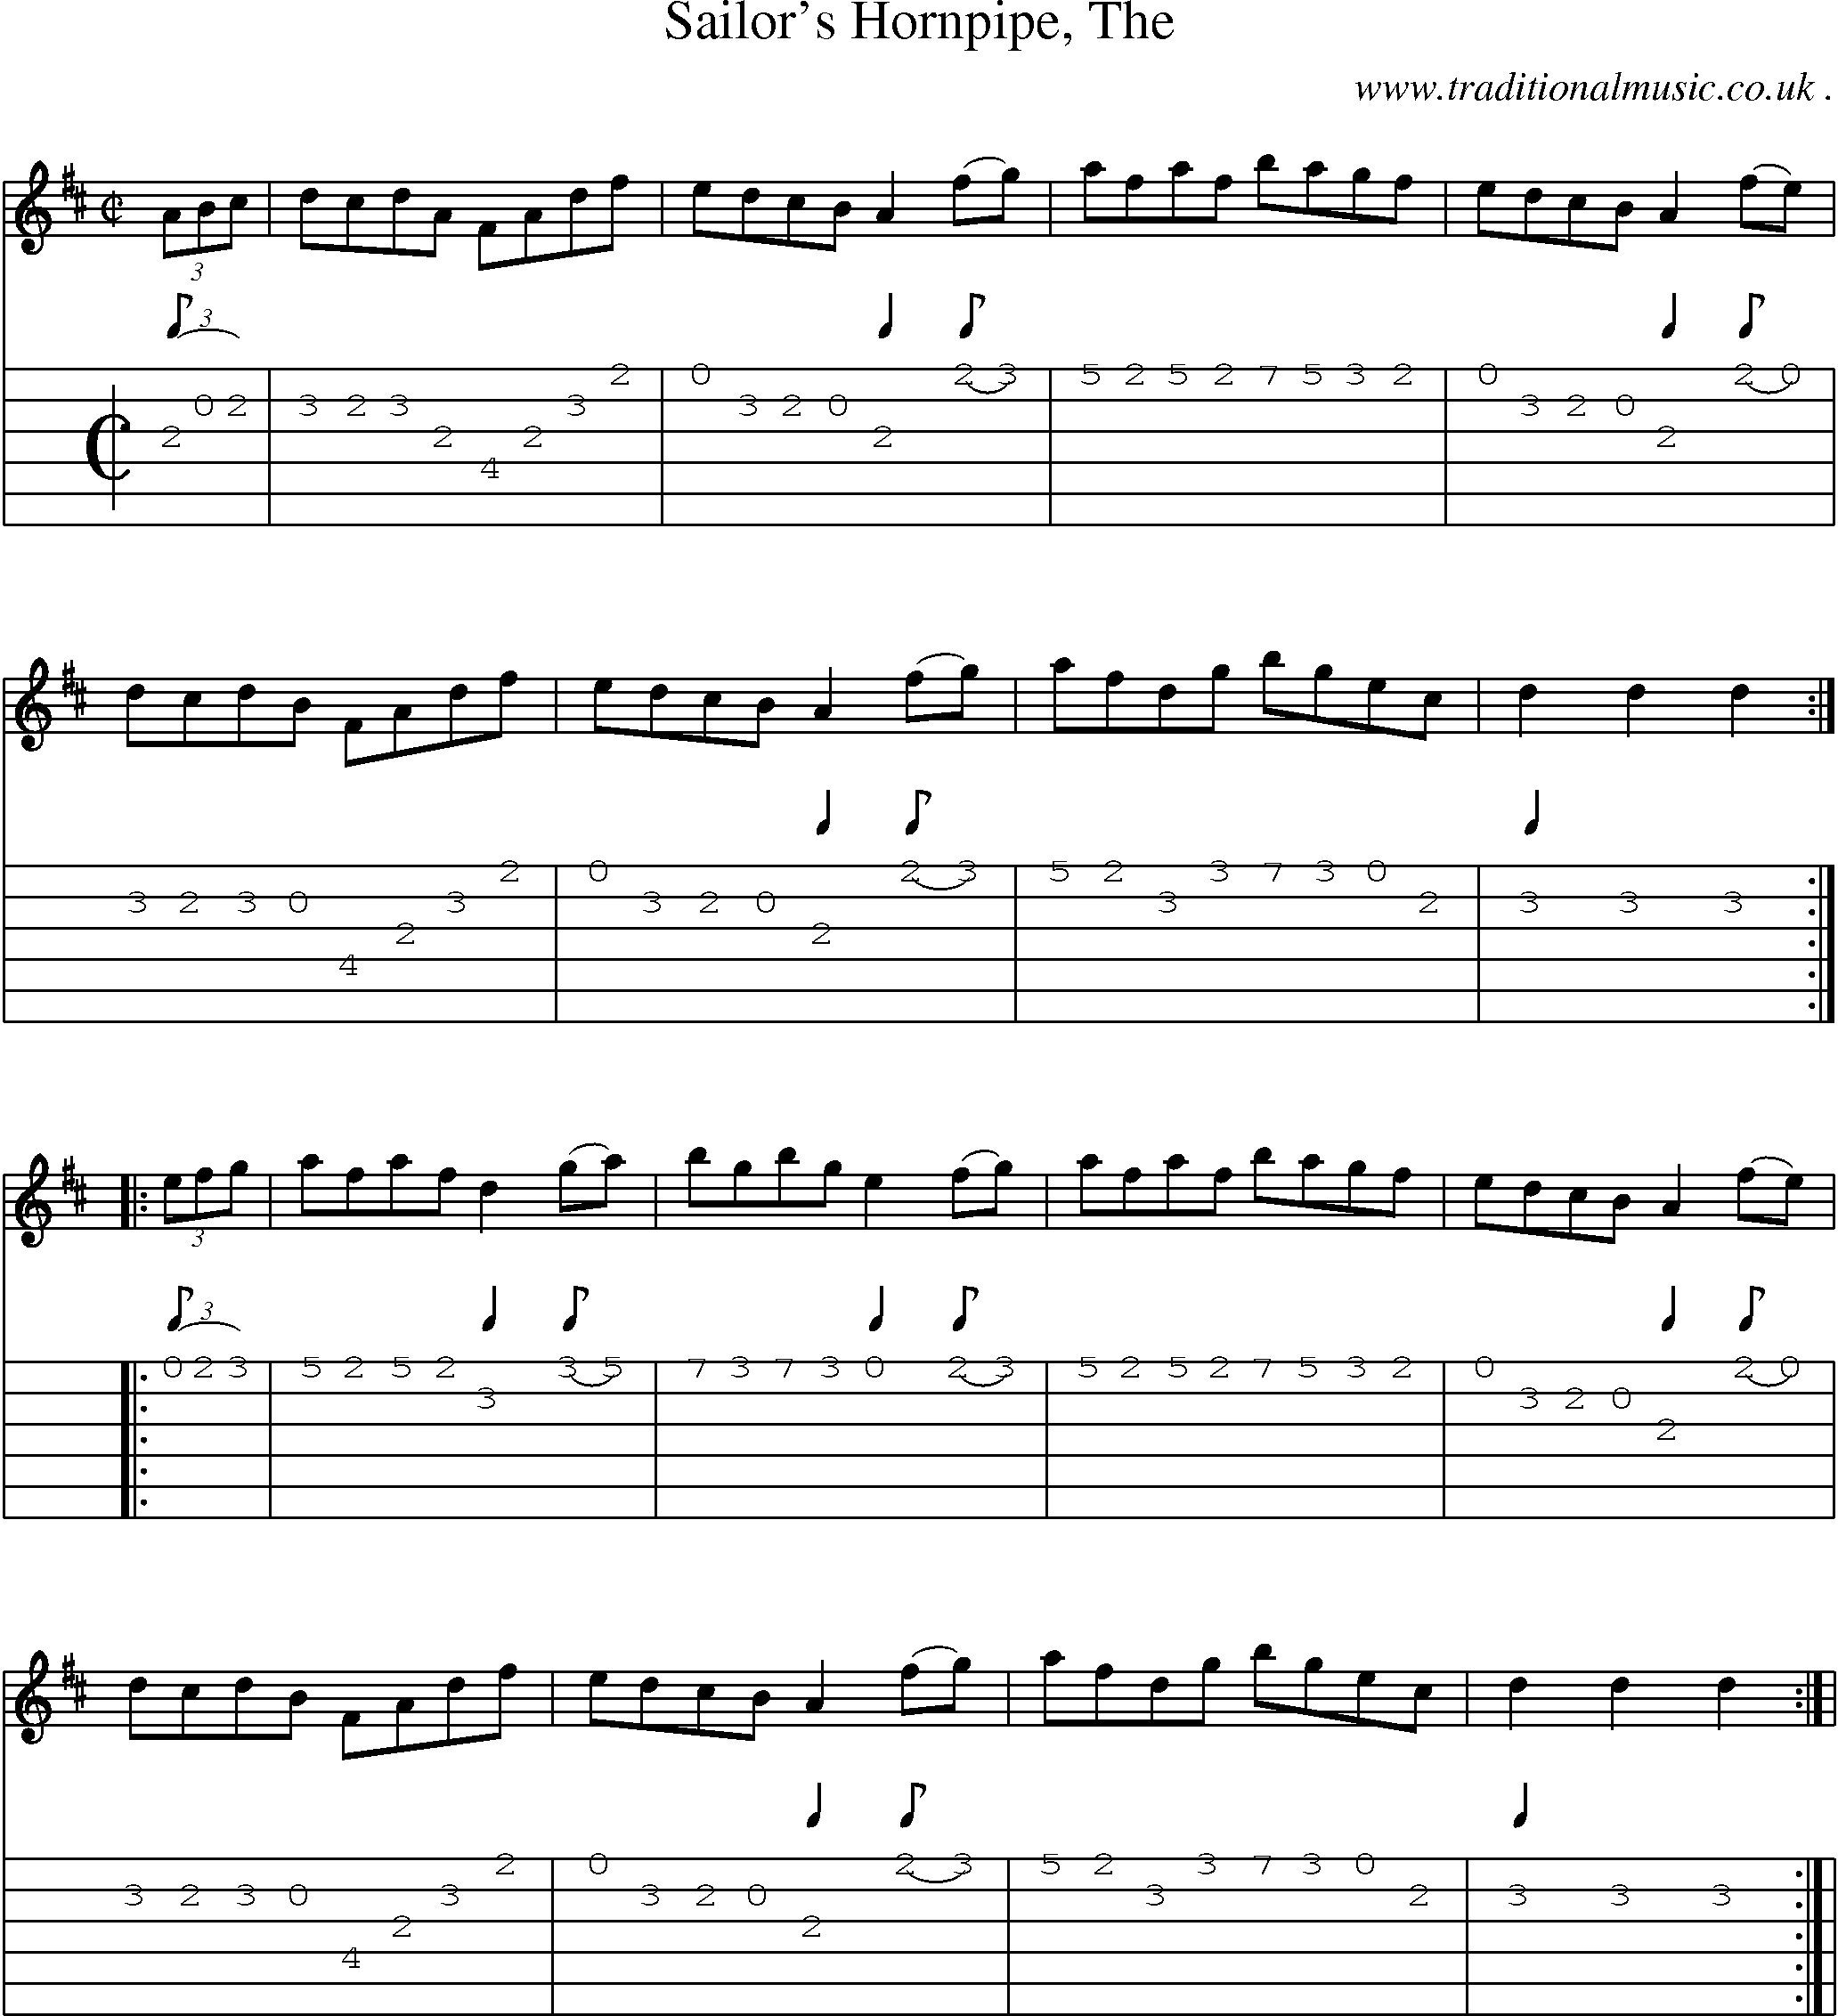 Music Score and Guitar Tabs for Sailors Hornpipe The